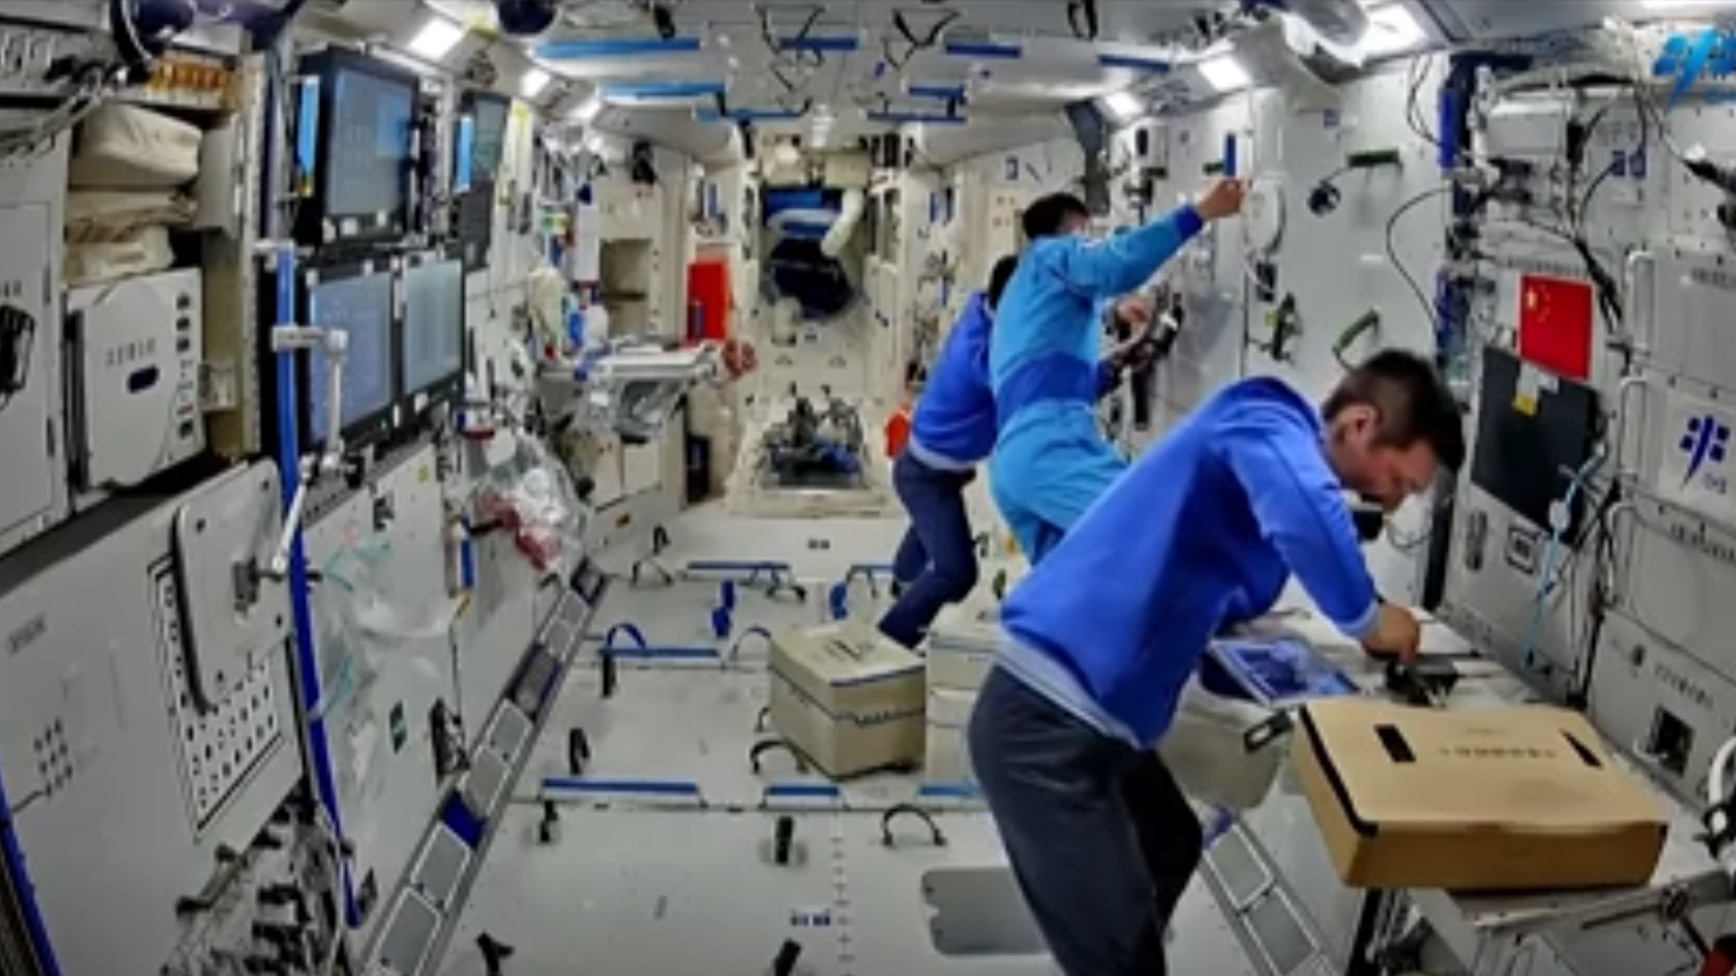 three astronauts in blue flight suits work inside a white-walled space station